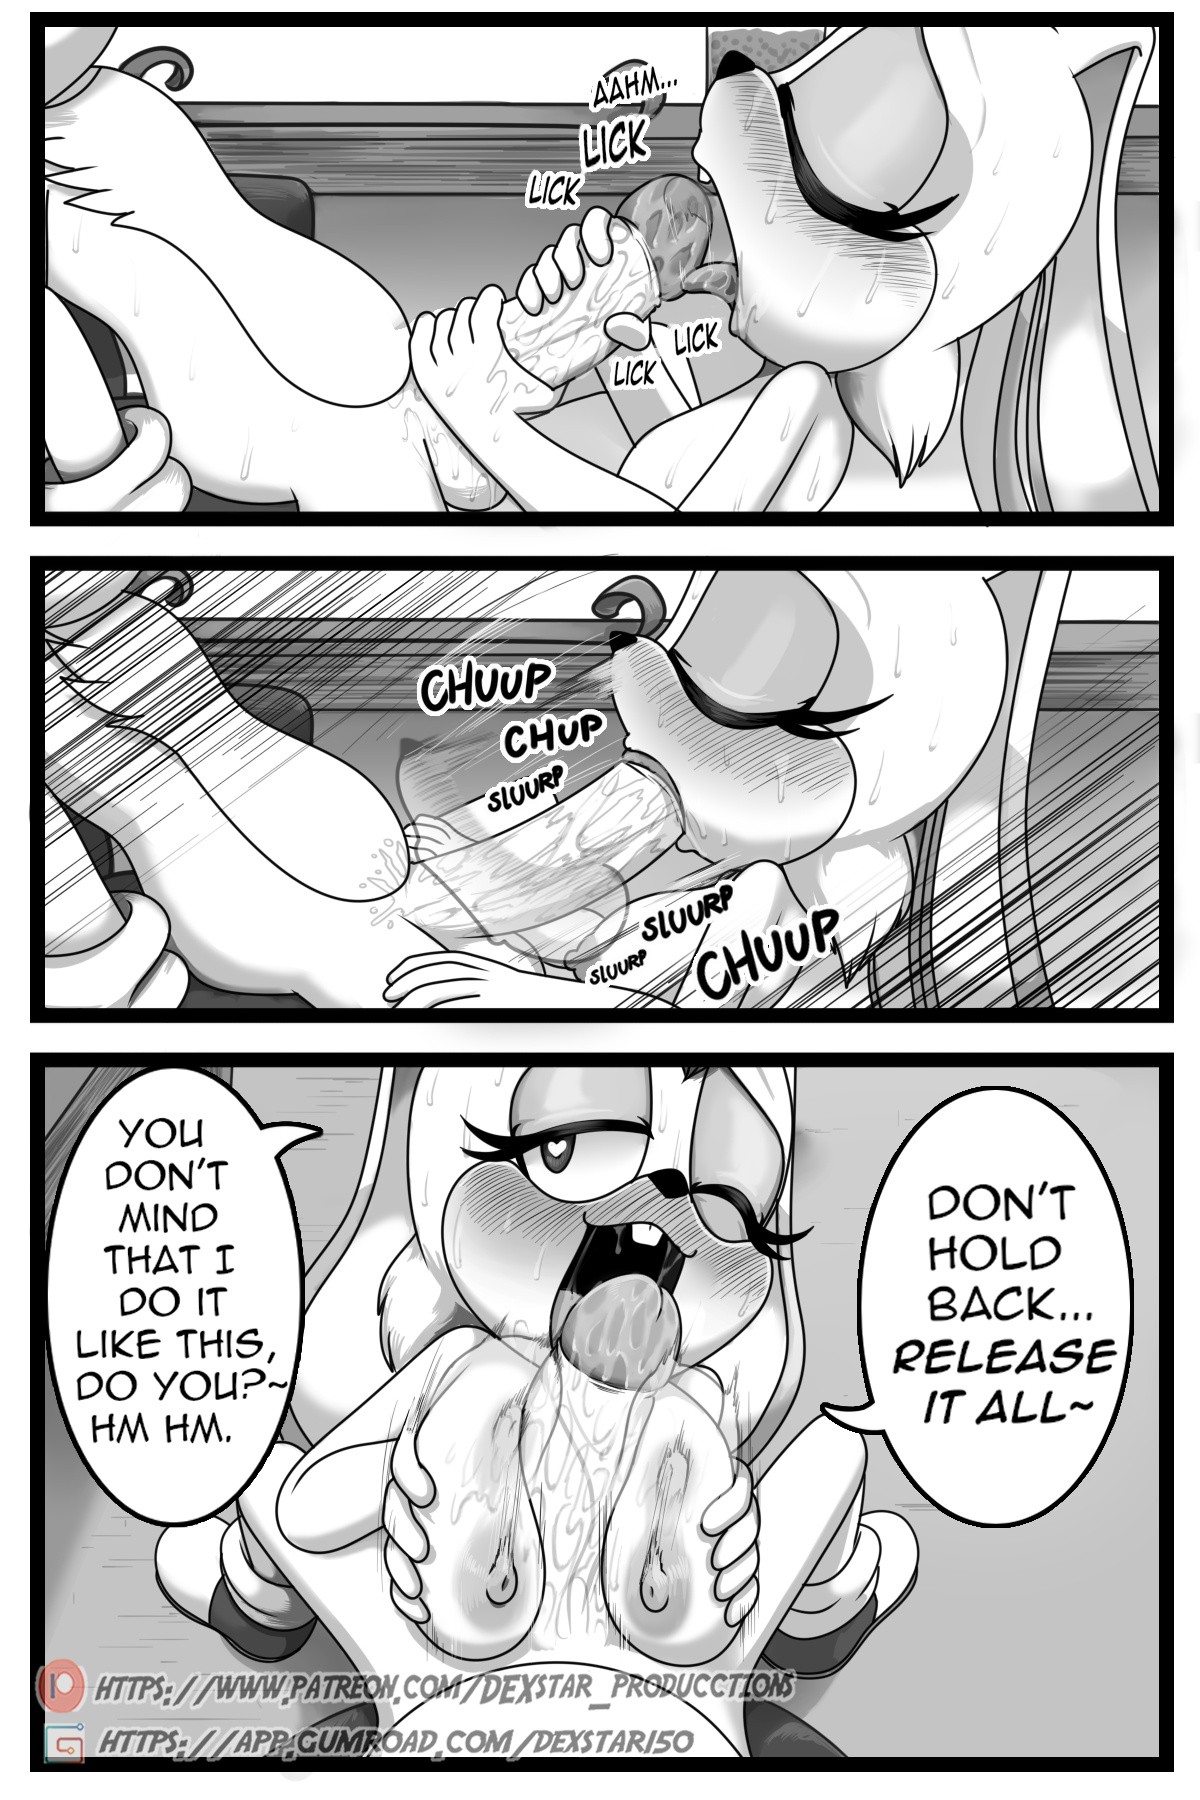 PLEASE FUCK ME - Cream x Tail (Extra Story!) porn comic picture 34